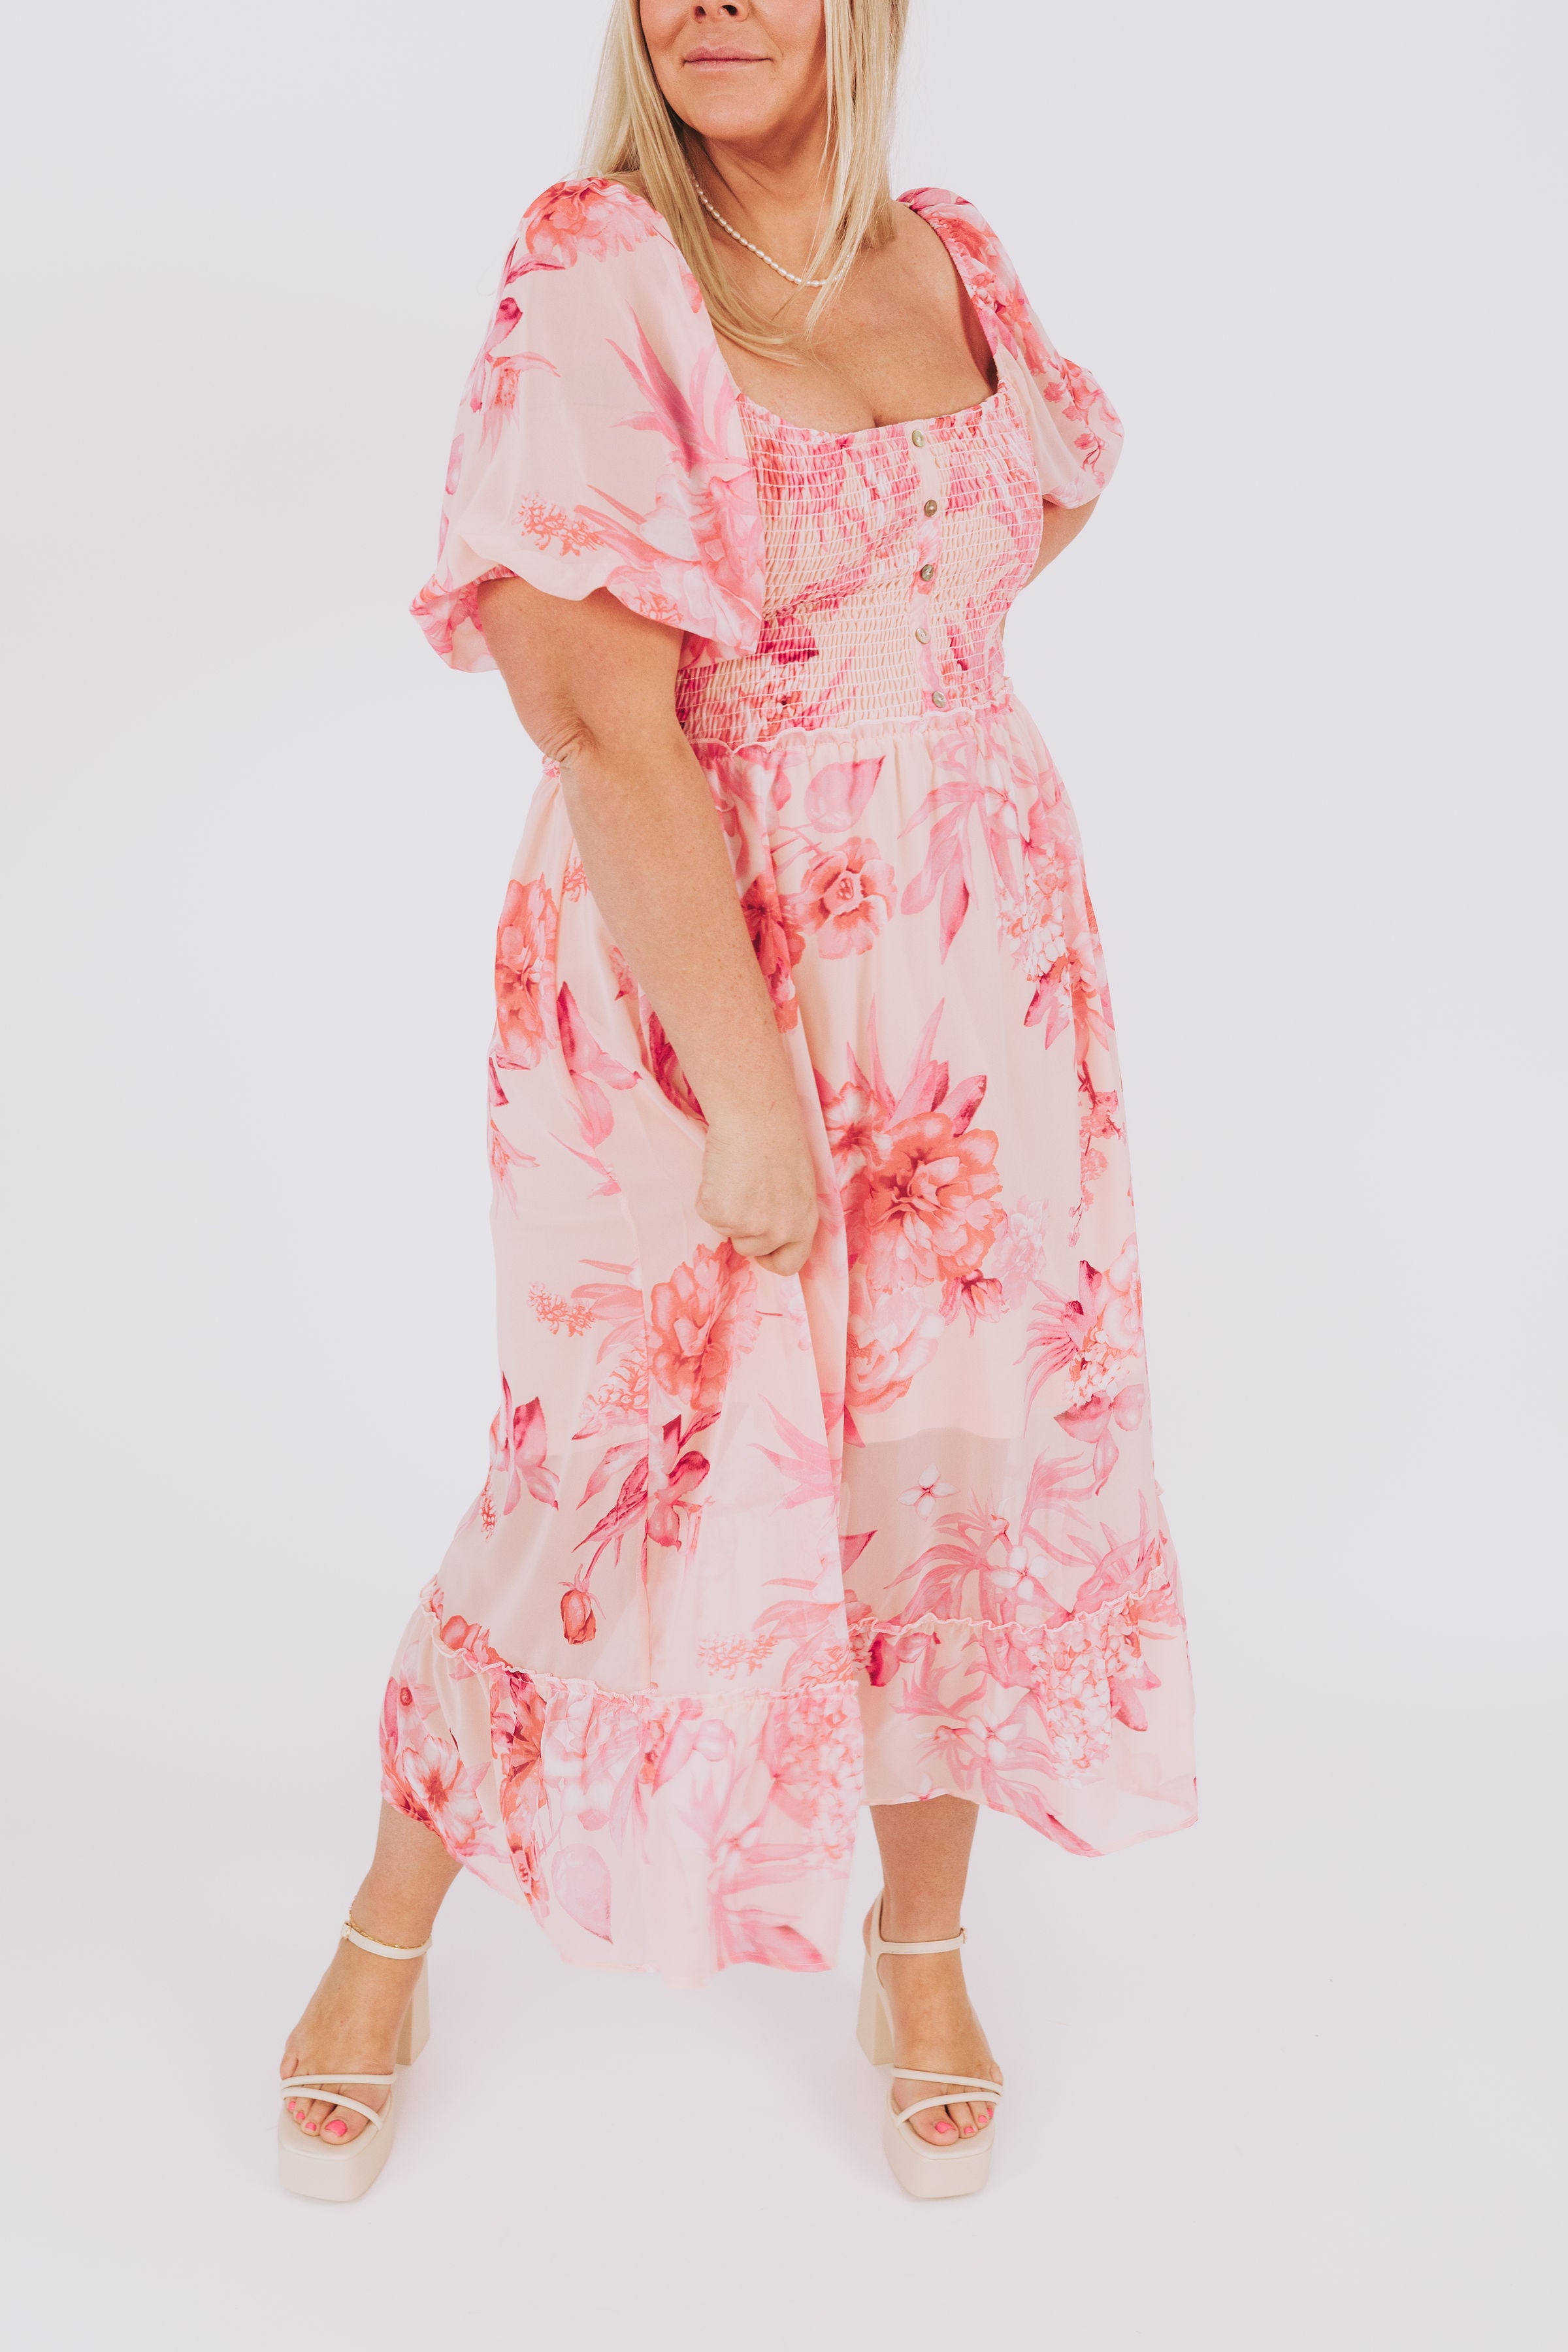 PLUS SIZE - This One Time Dress